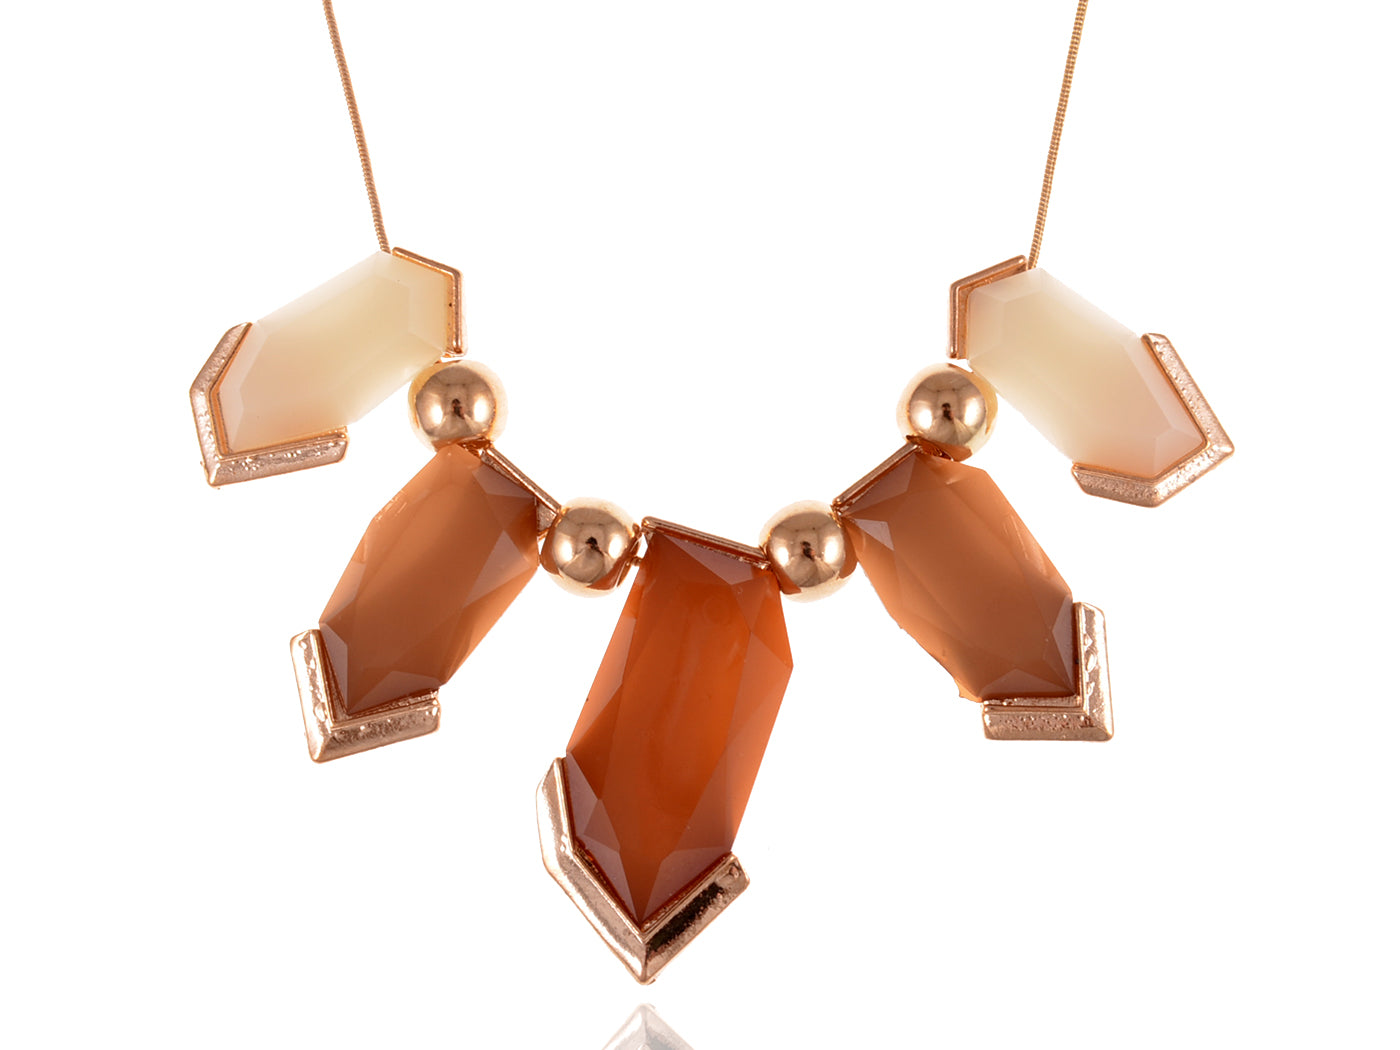 Statement Gemss Collar Necklace With Accents